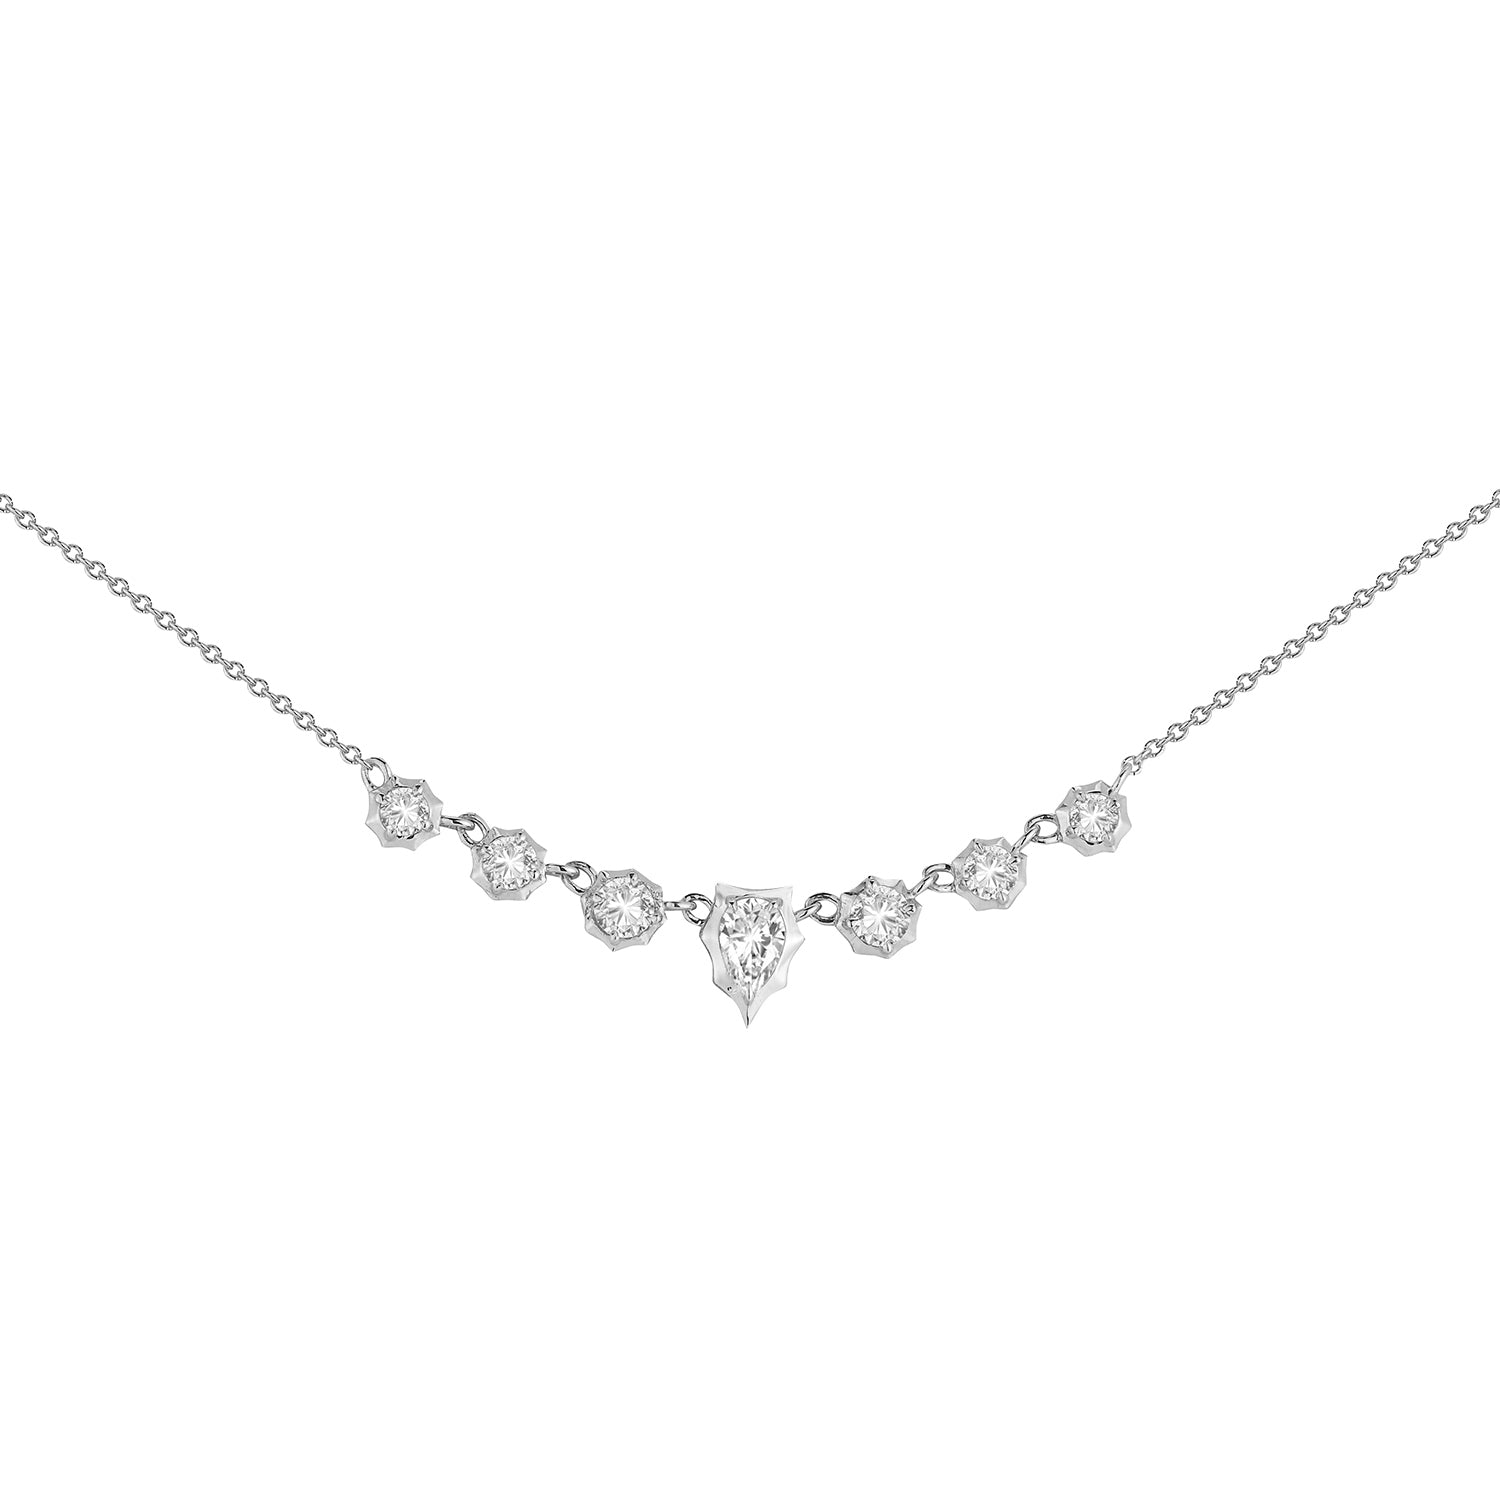 Small Envoy Necklace in 18K White Gold